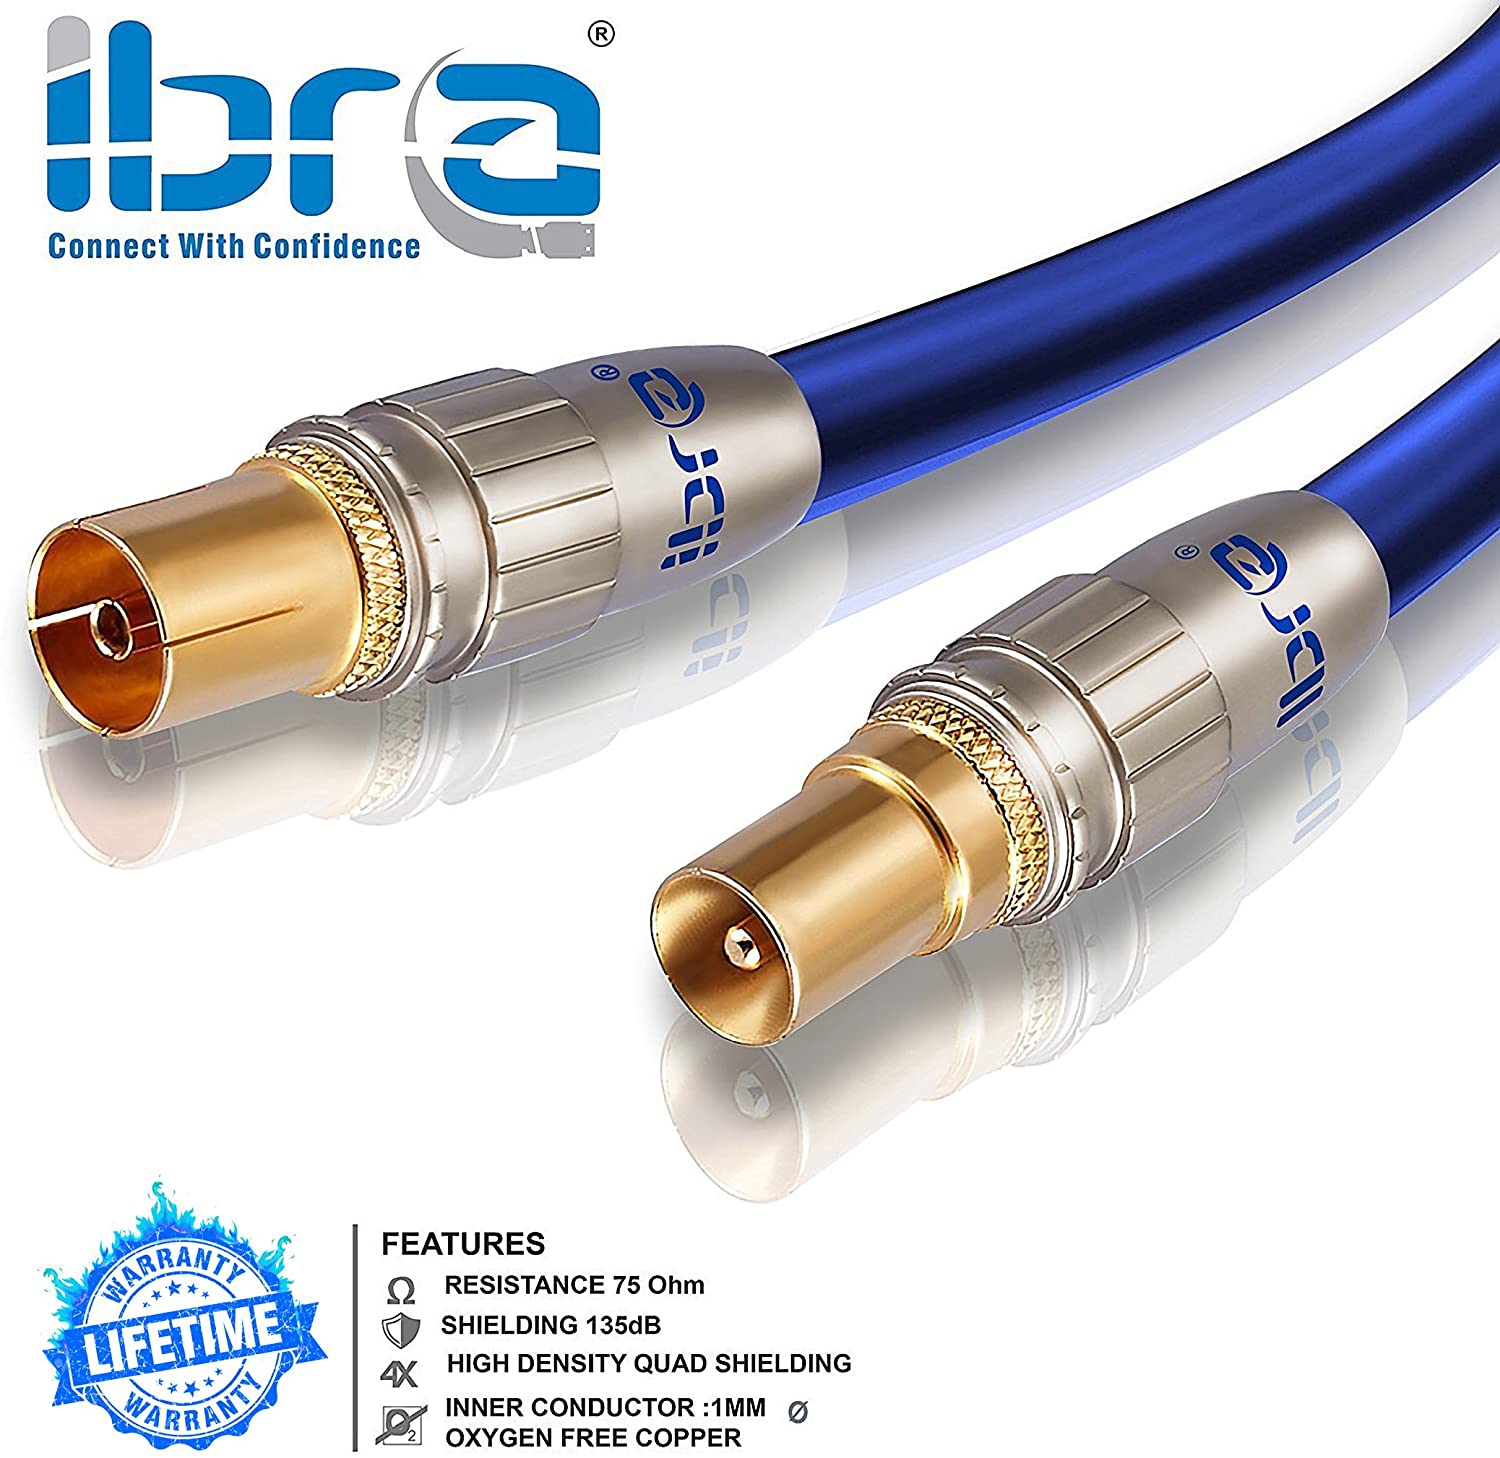 1m HDTV Antenna Cable|TV Aerial Cable|Premium Coaxial Cable|Connectors: Coax Male to Coax Female|For UHF/RF/DVB-T/DVB-T2 TVs, VCRs, DVD players, DVRs, cable boxes and satellite| IBRA Blue Gold